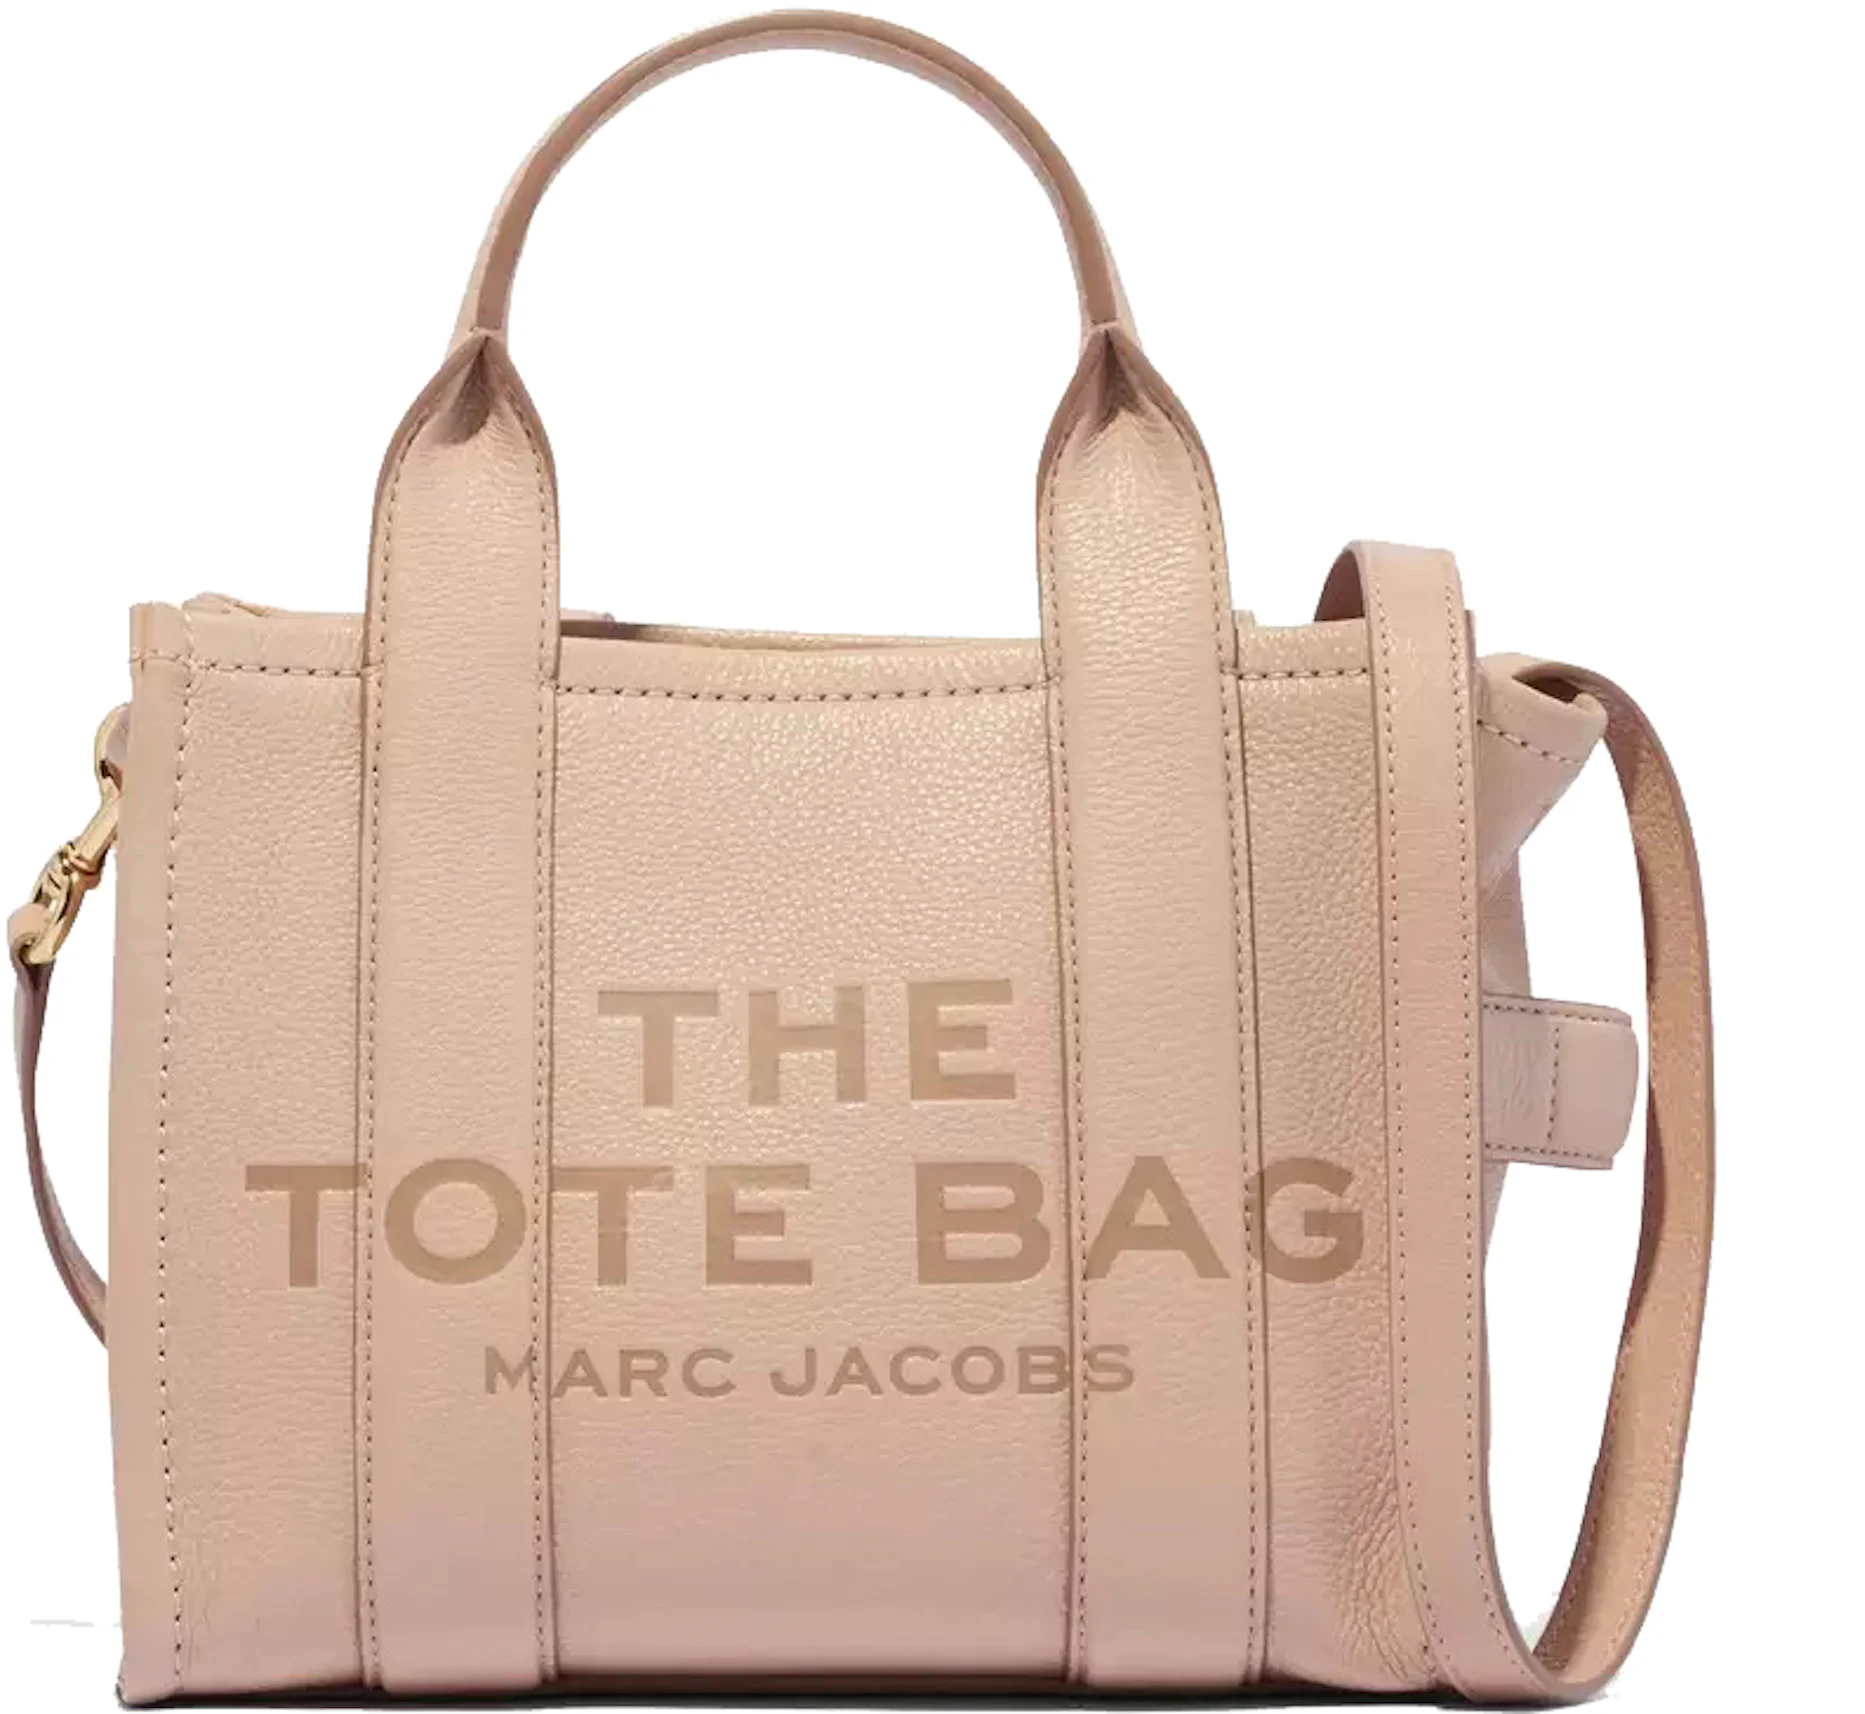 Marc Jacobs The Leather Tote Bag Small Rose Dust in Grain Leather with ...